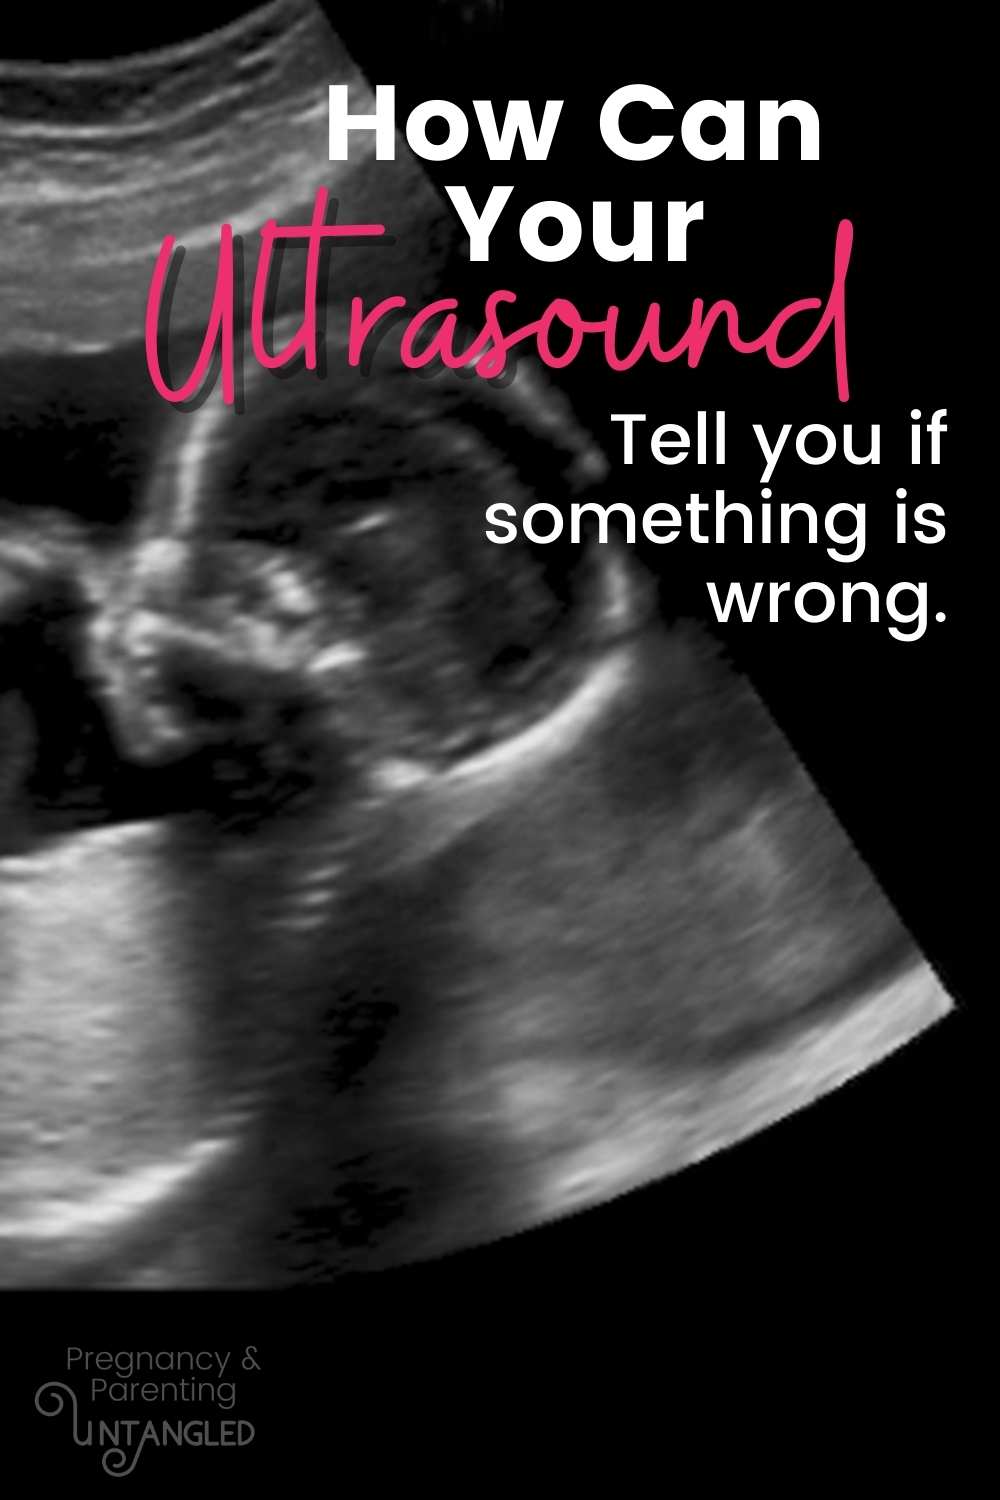 While there are routine ultrasounds that almost every pregnant person gets. There are specific ultrasound that are ordered if there is an issue seen. Today we're going to go through those issues and what they might be interested in. via @pullingcurls